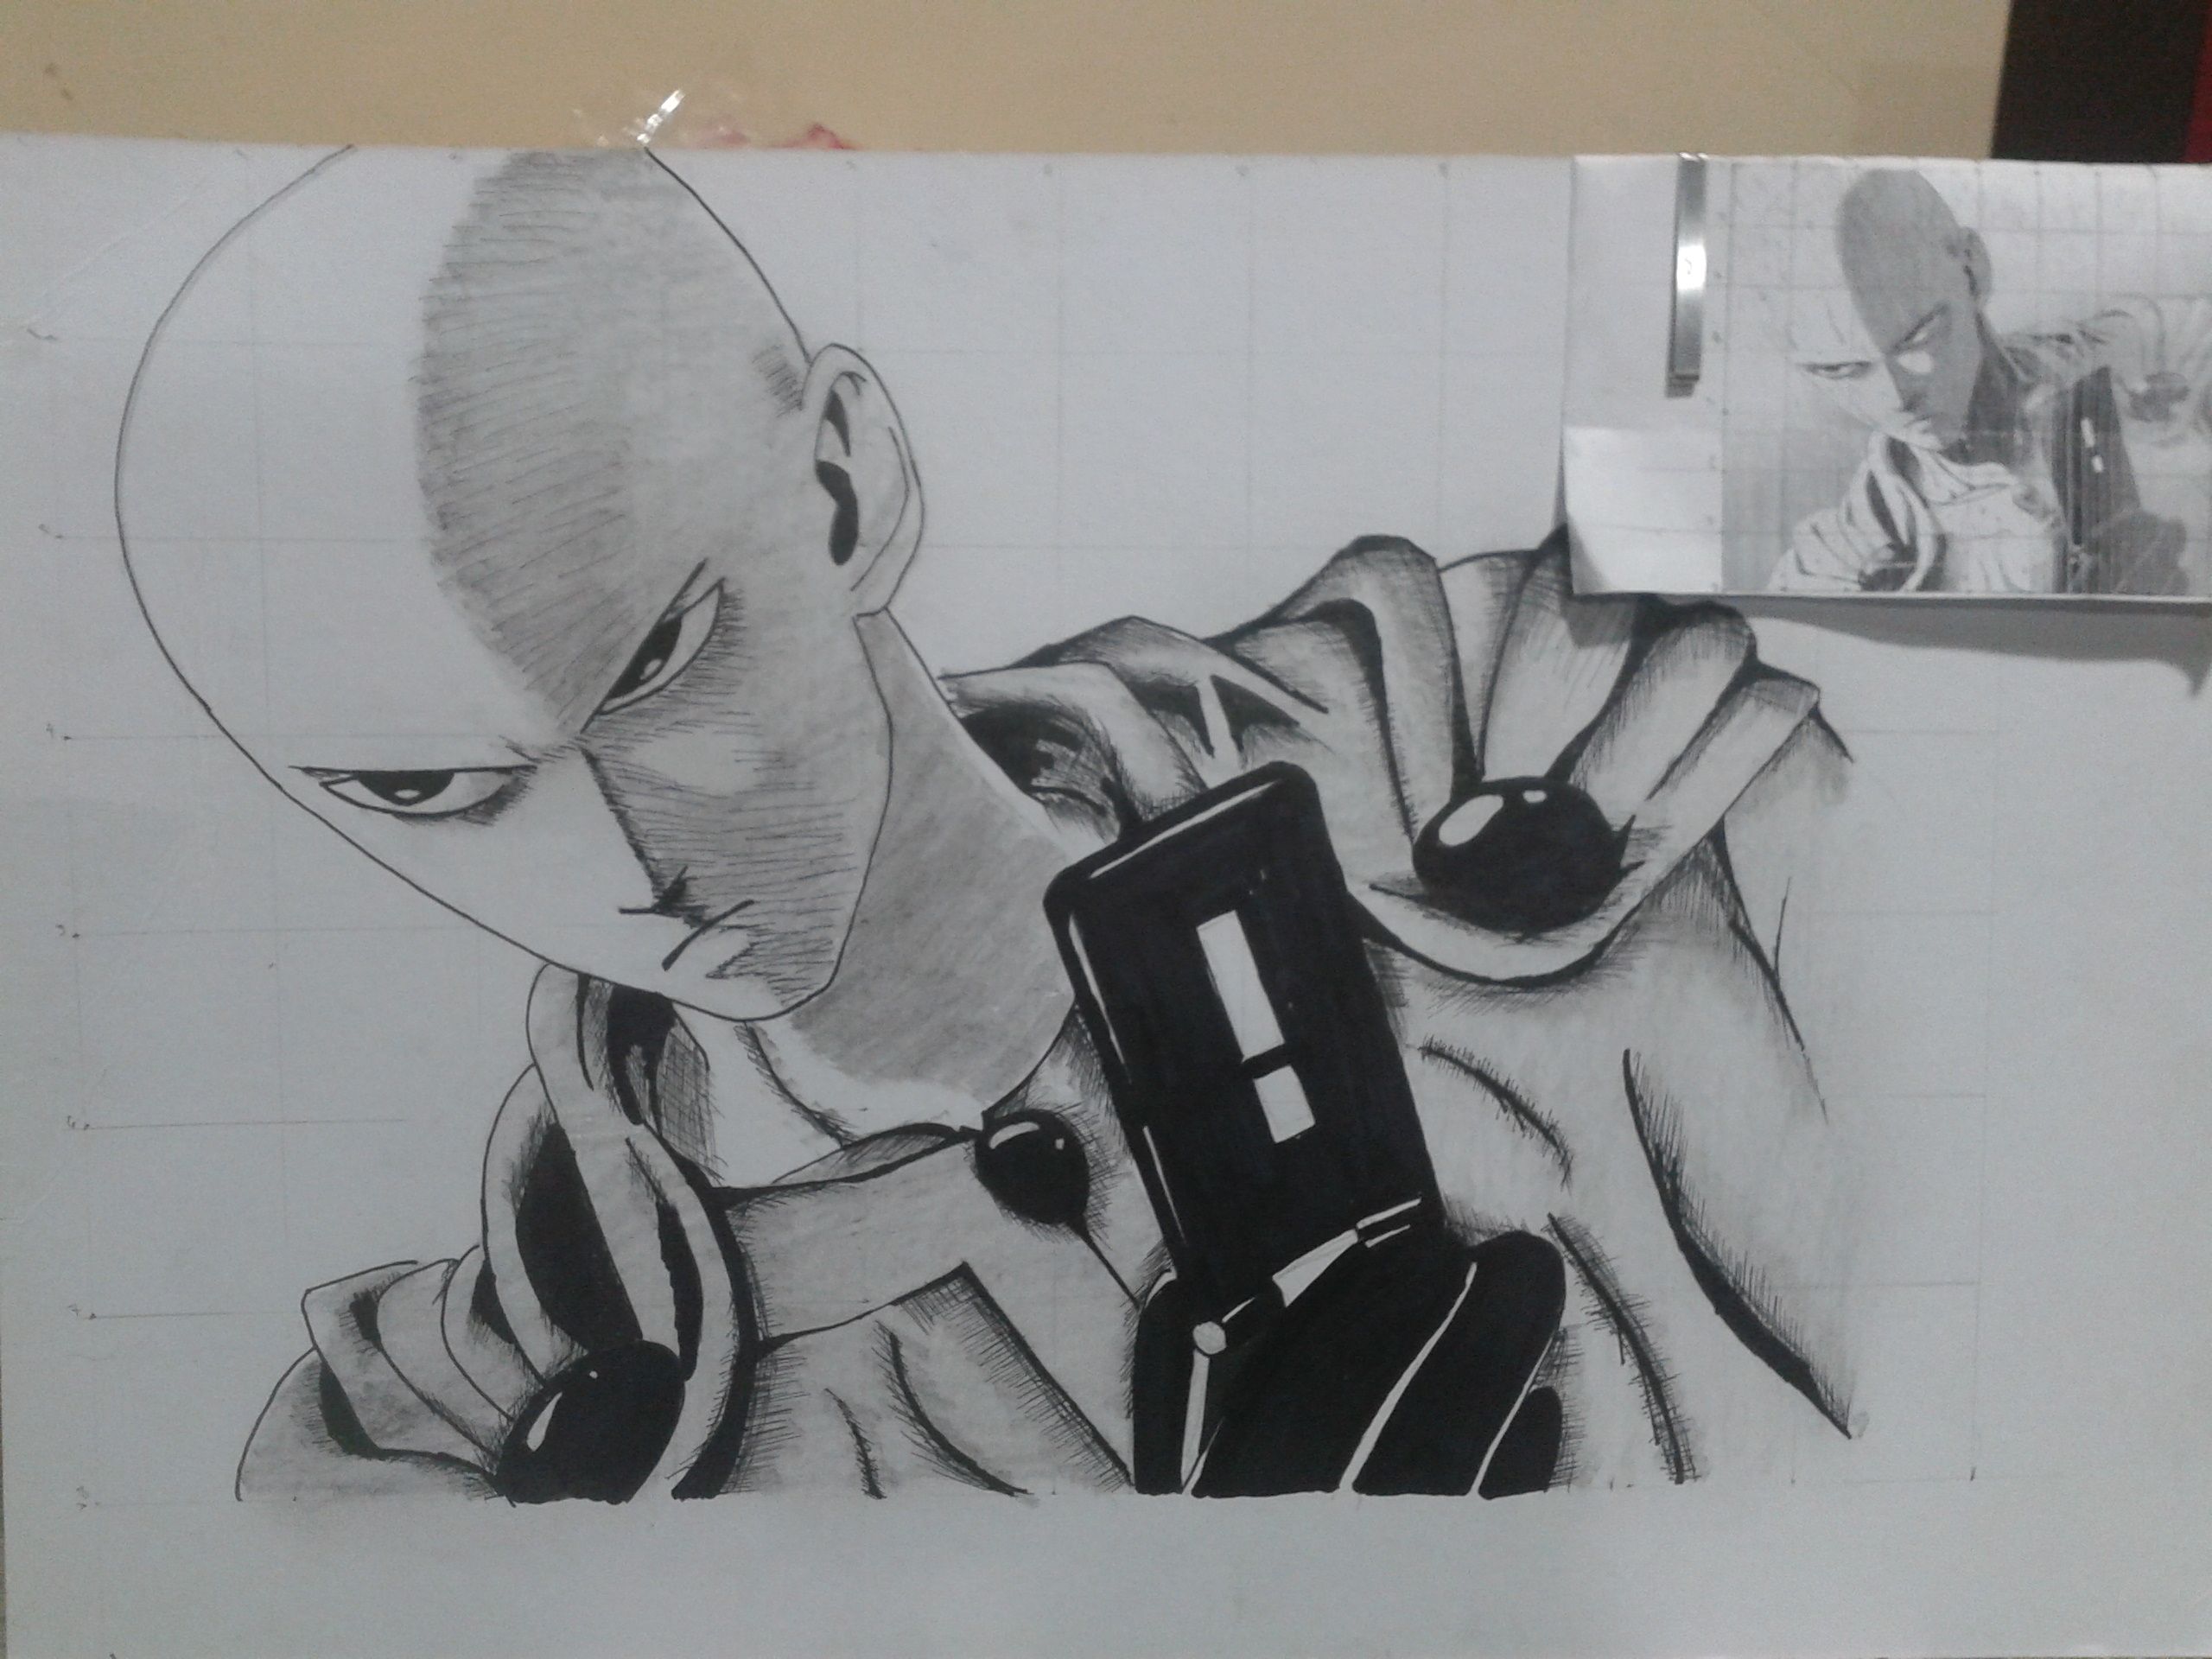 New Drawing of Saitama from One Punch Man